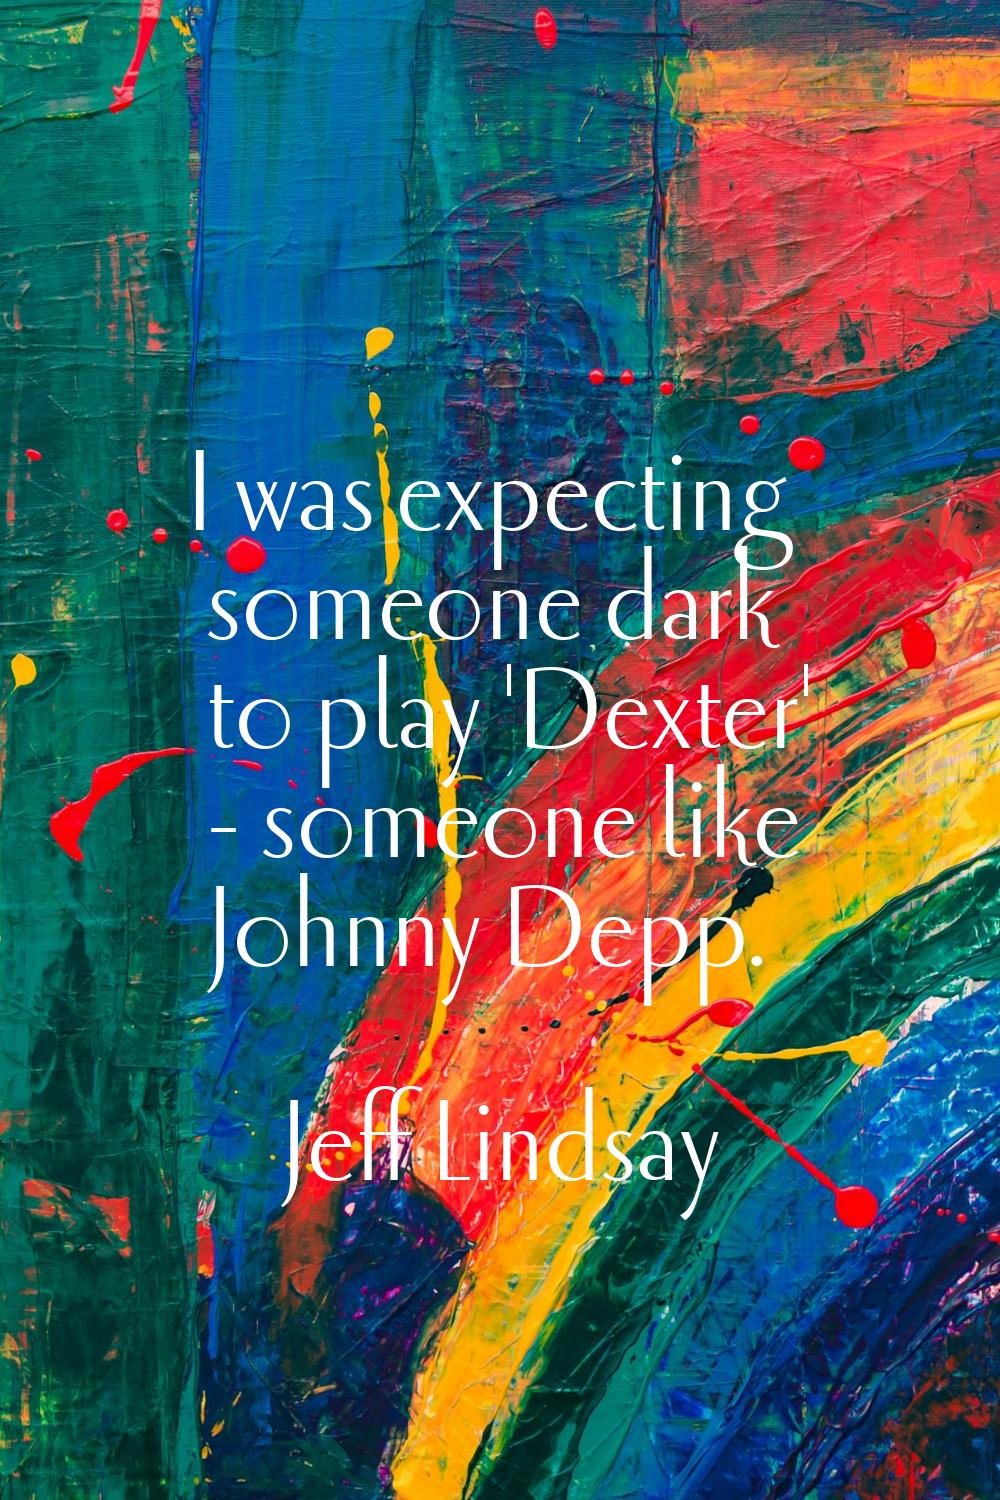 I was expecting someone dark to play 'Dexter' - someone like Johnny Depp.